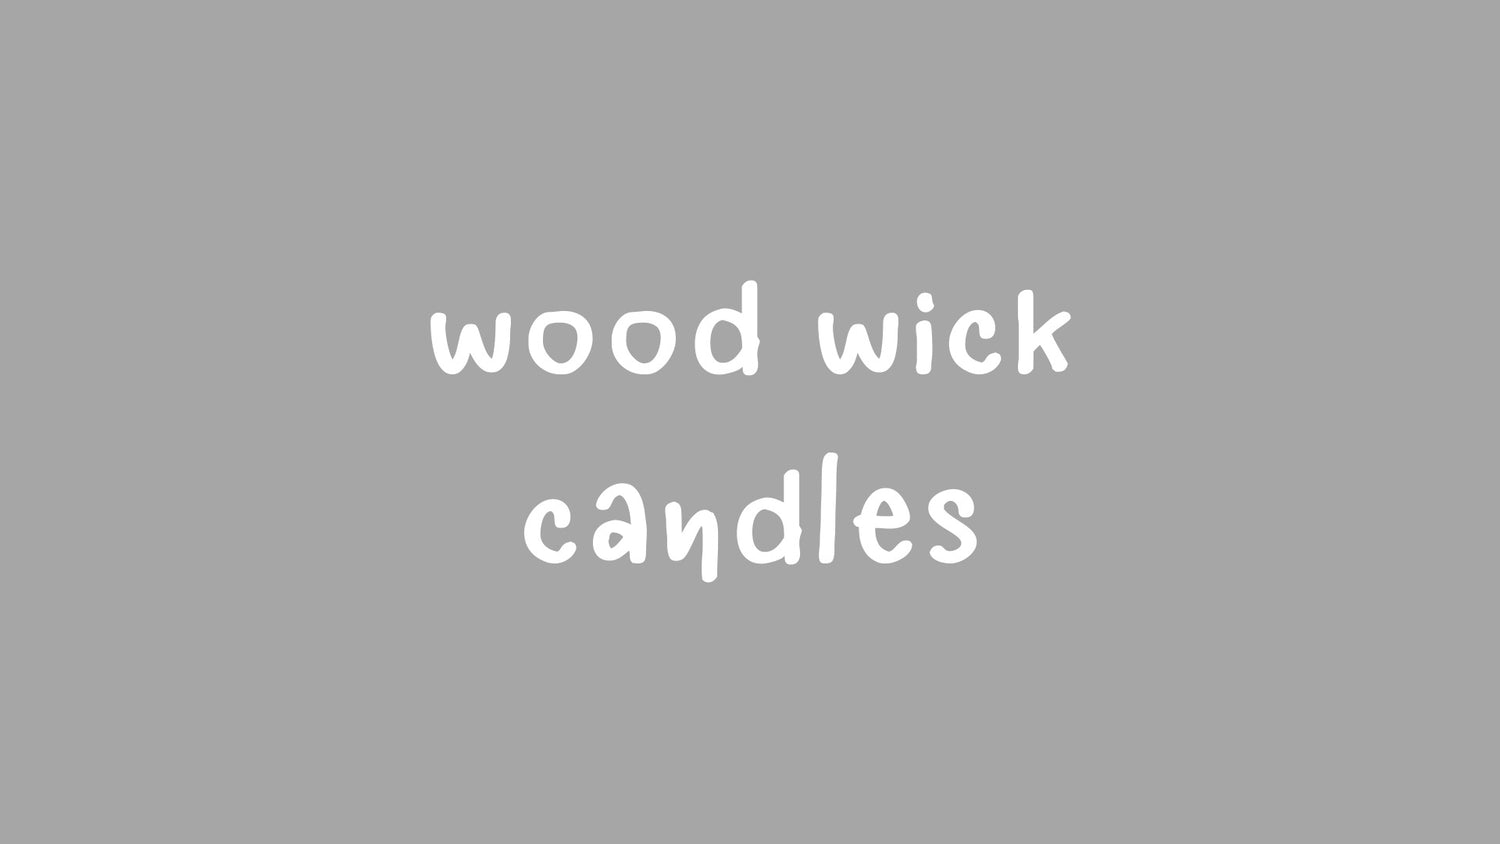 WOOD WICK CANDLES